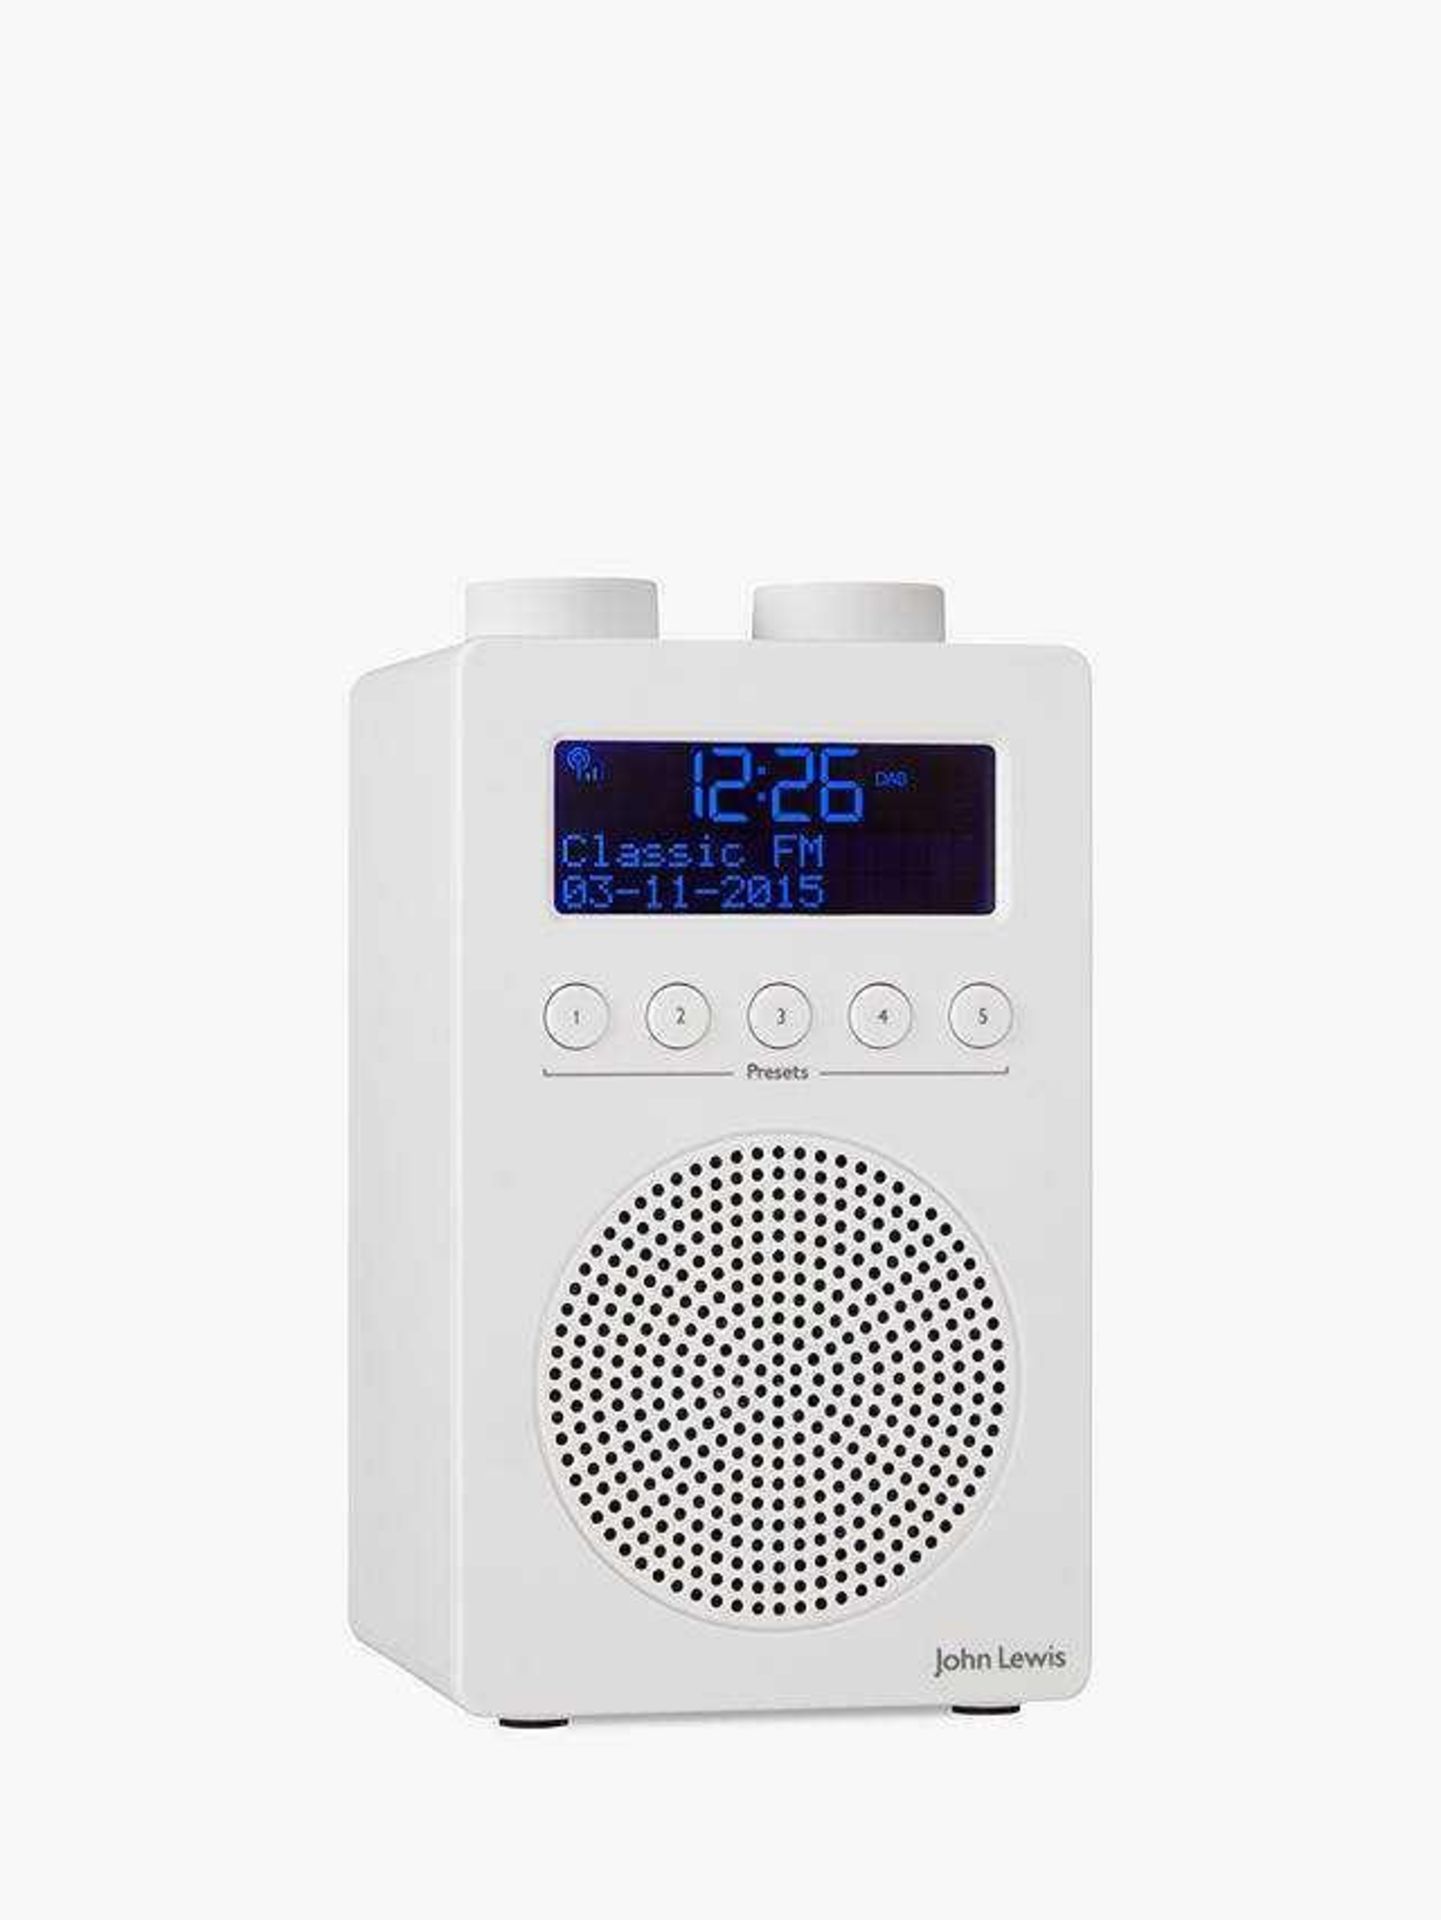 Rrp £40 Each Boxed John Lewis Spectrum Solo Dab And Fm Digital Radios - Image 4 of 7